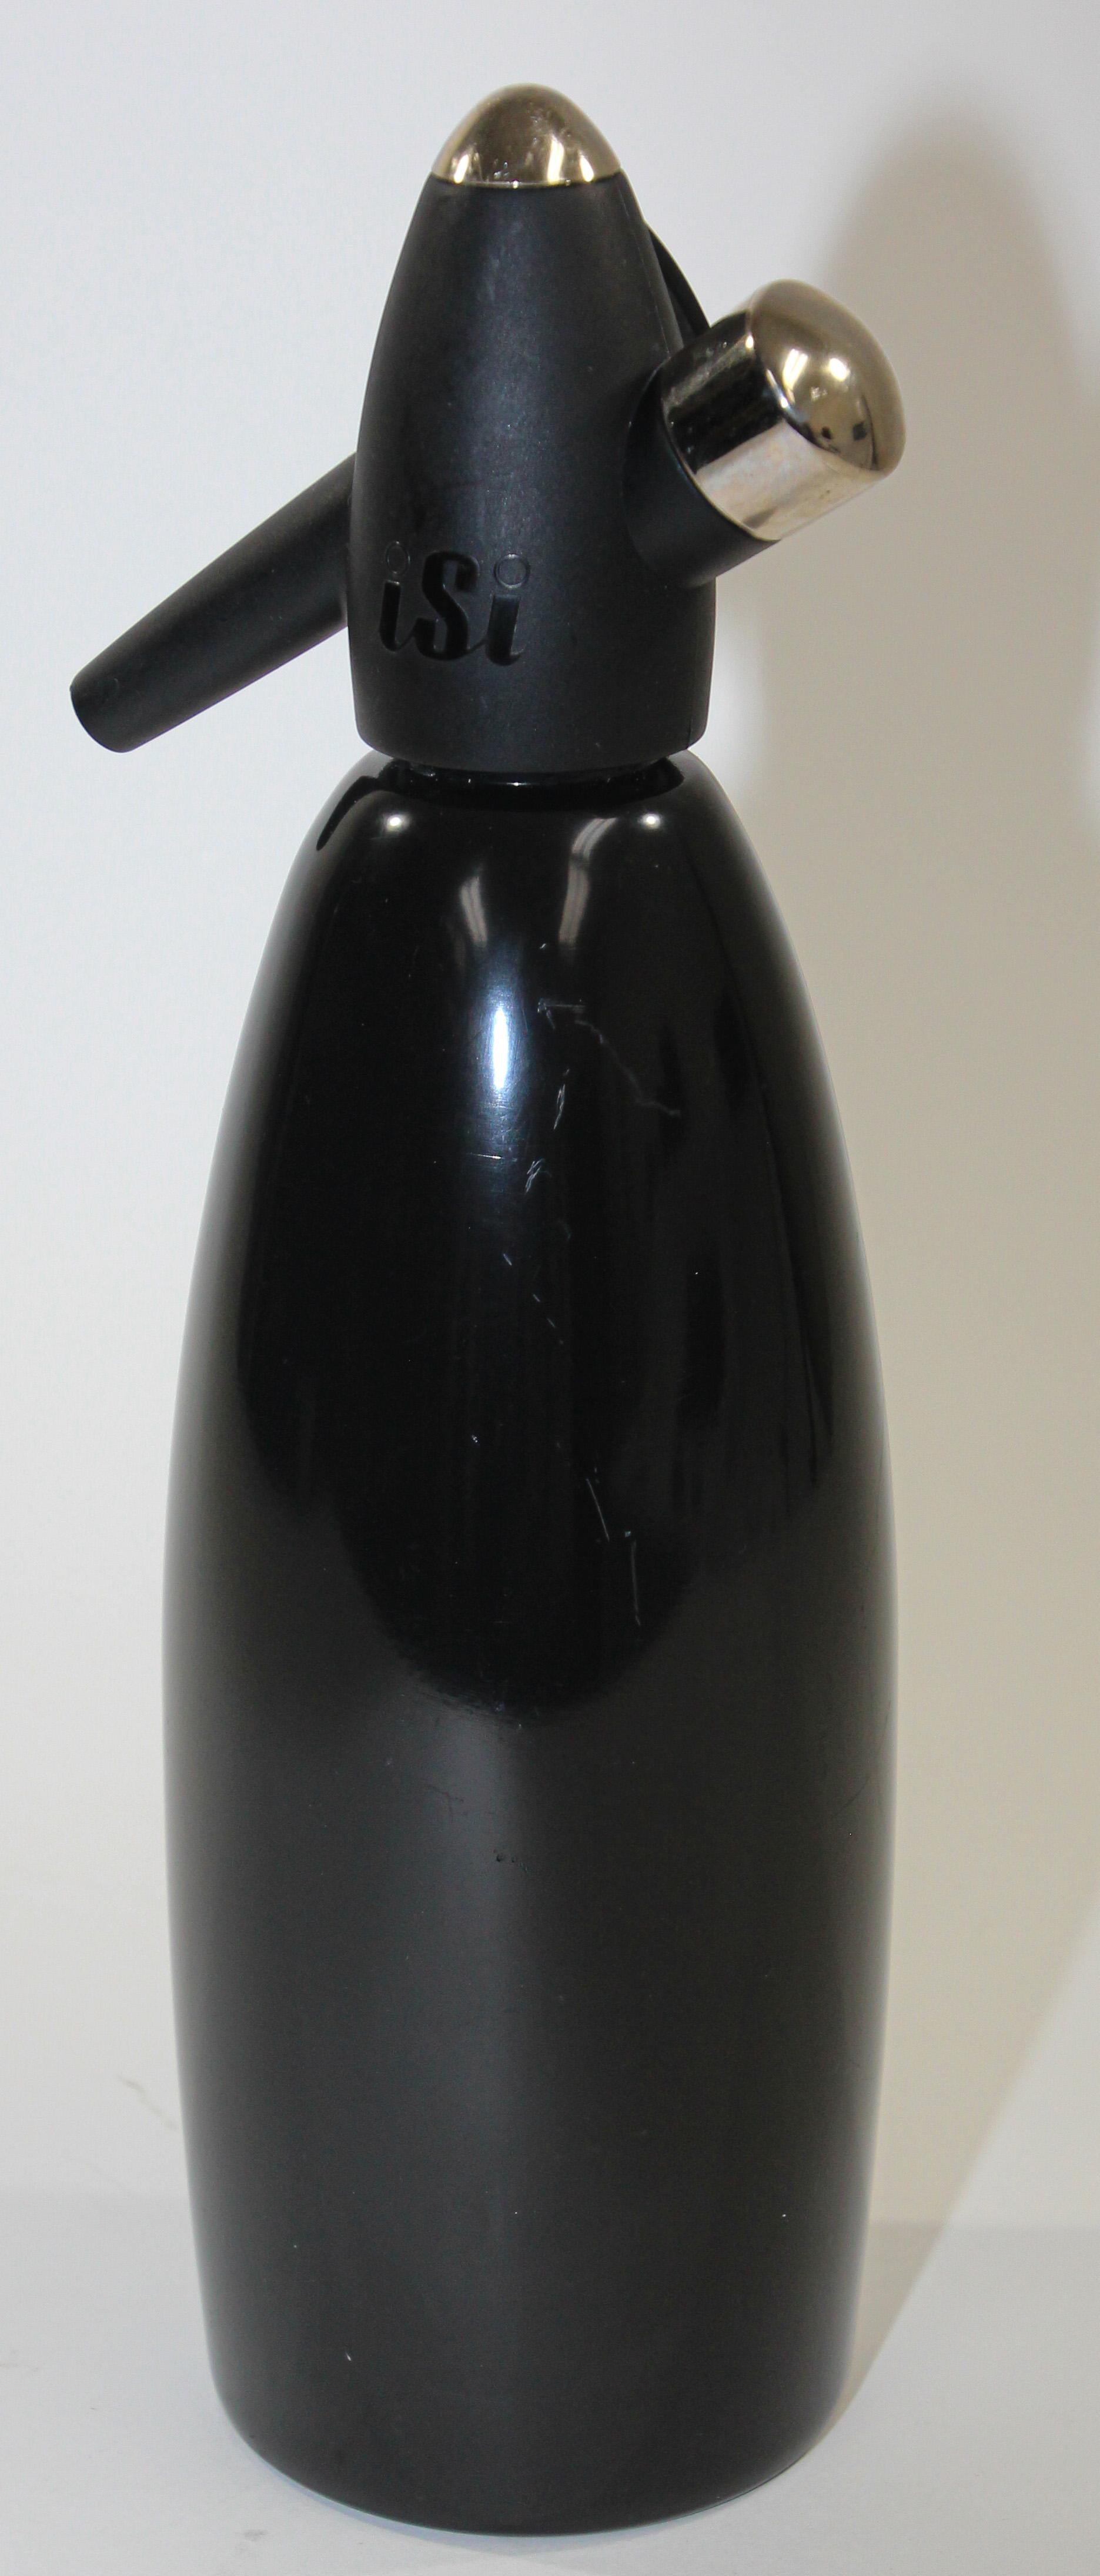 This is a fantastic Vintage Metallic black Metal Austrian ISI Soda Siphon seltzer bottle.
Enjoy the fresh and healthy fizz of sparkling water, carbonated juice drinks, wine spritzers, and handcrafted cocktails. 
Vintage modern barware decor soda